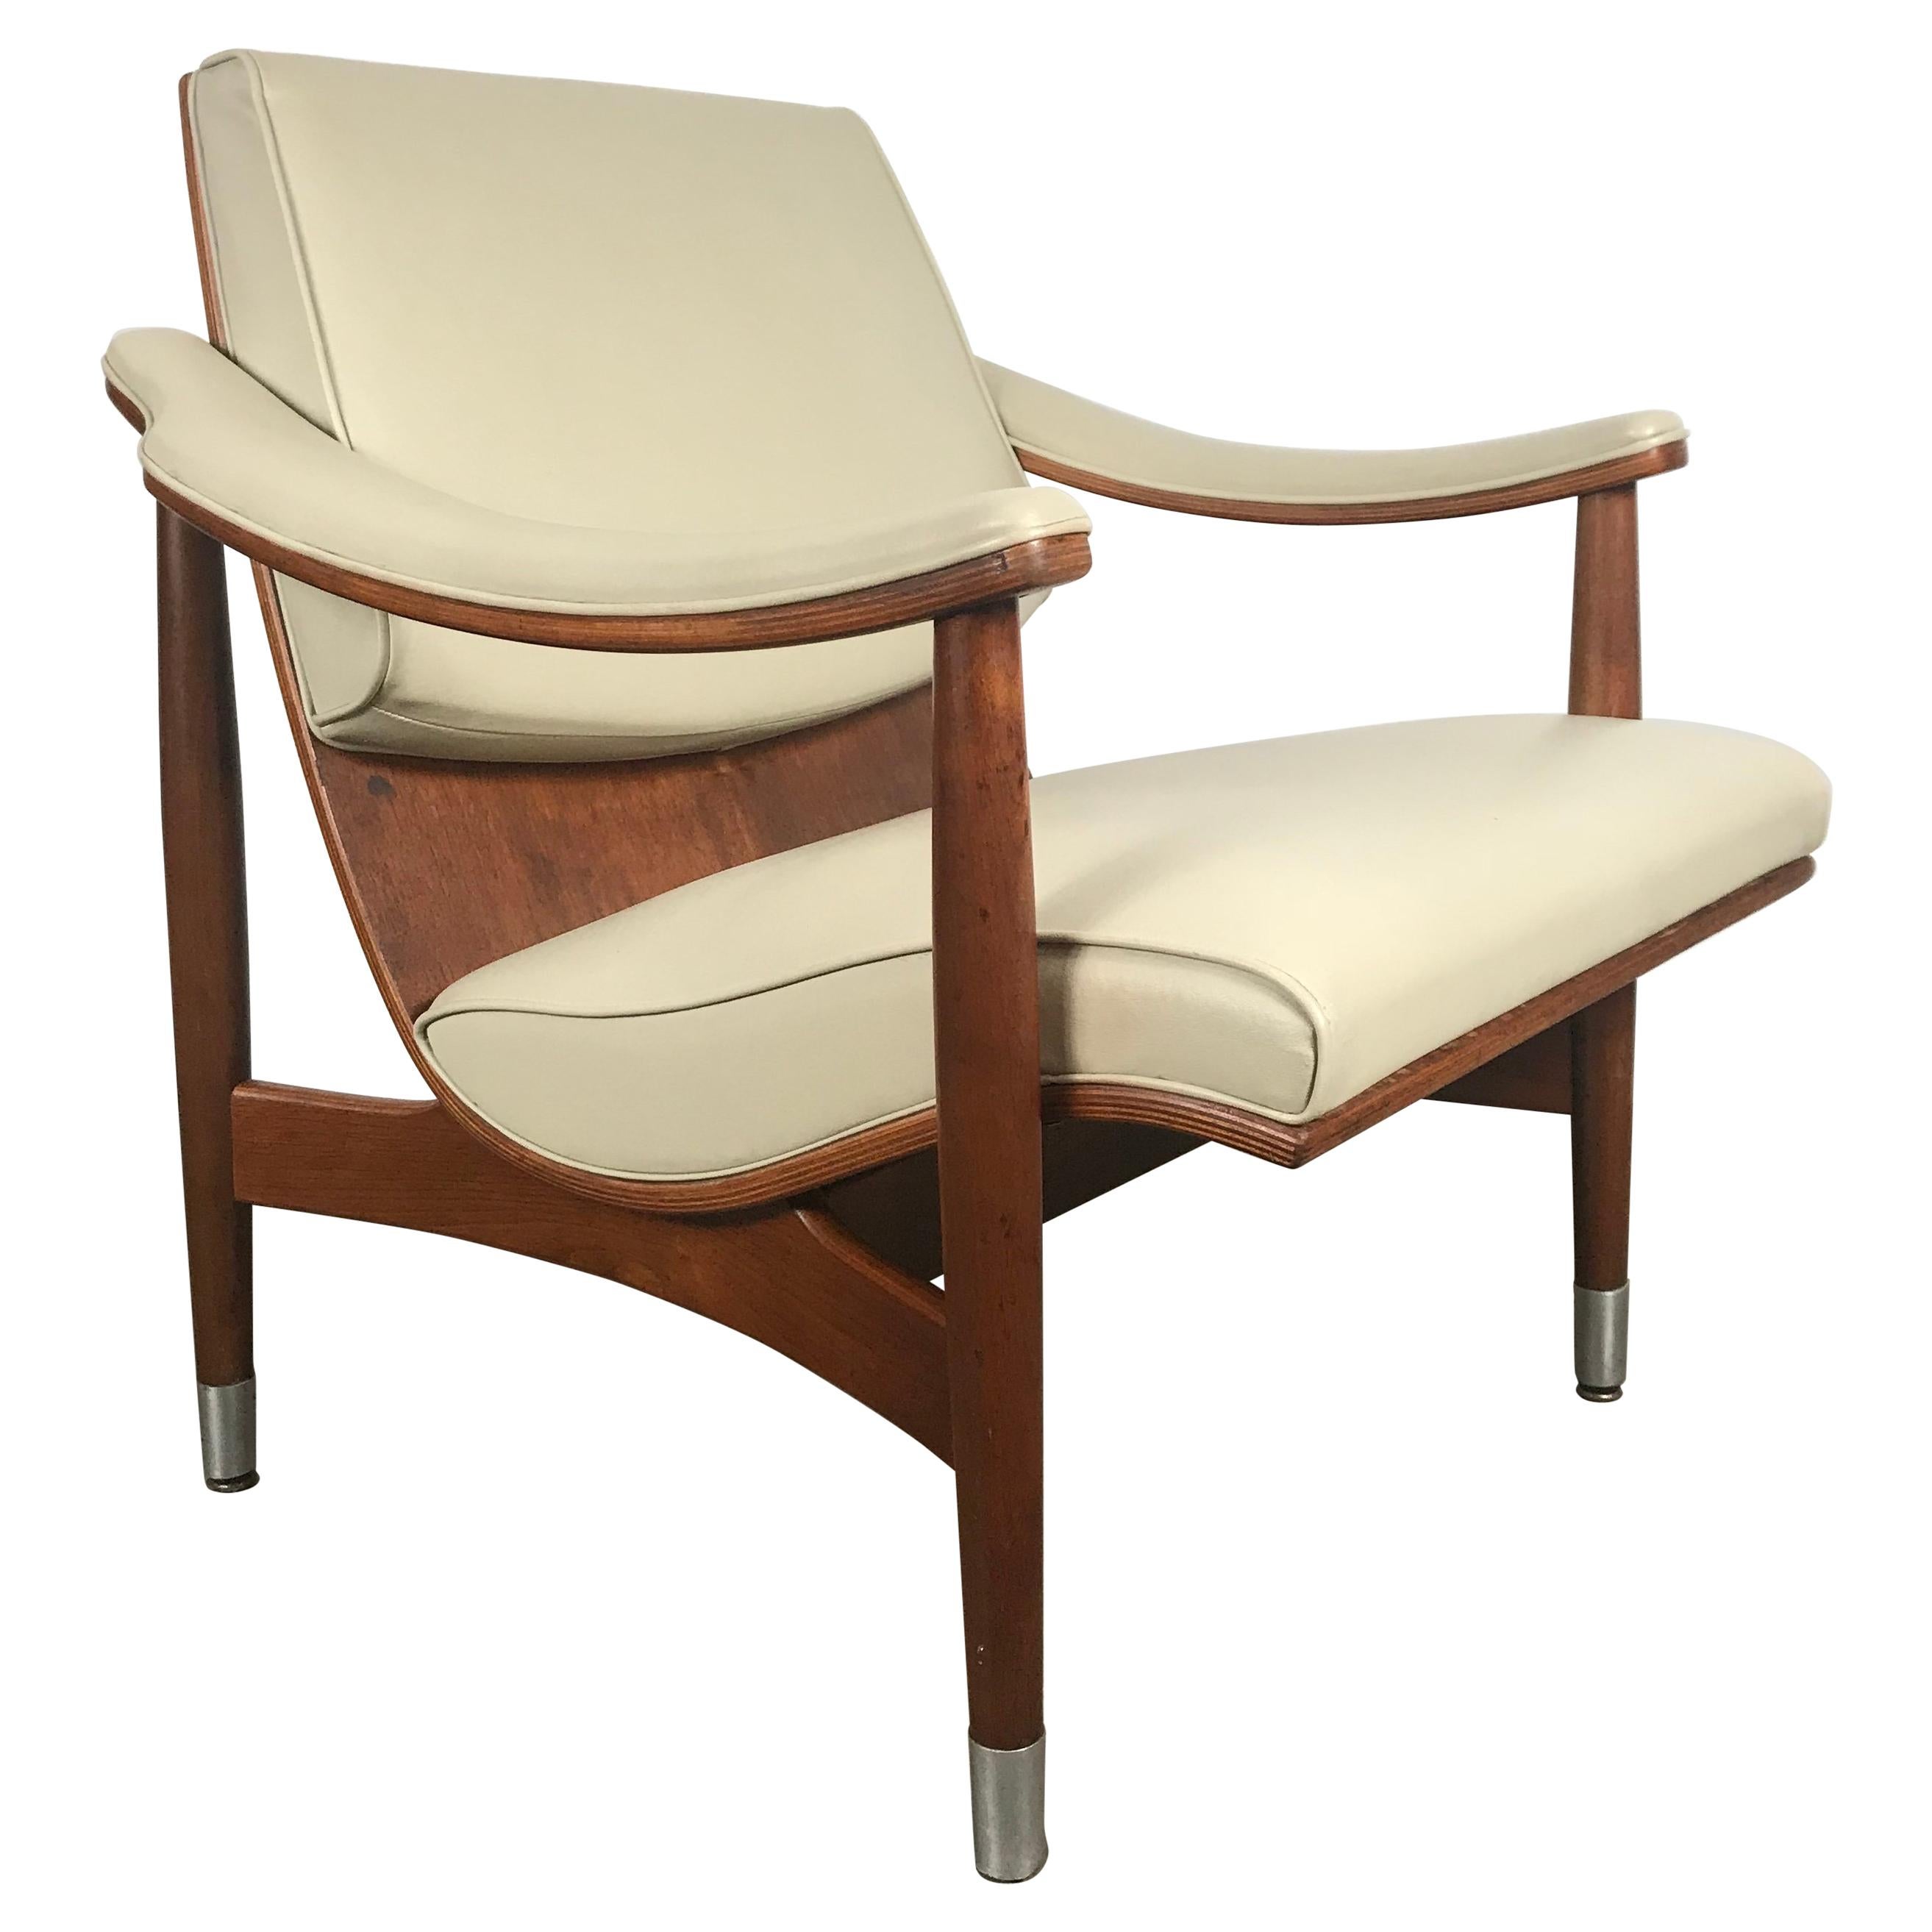 Classic Mid-Century Modern Plywood Scoop Lounge Chair by Thonet